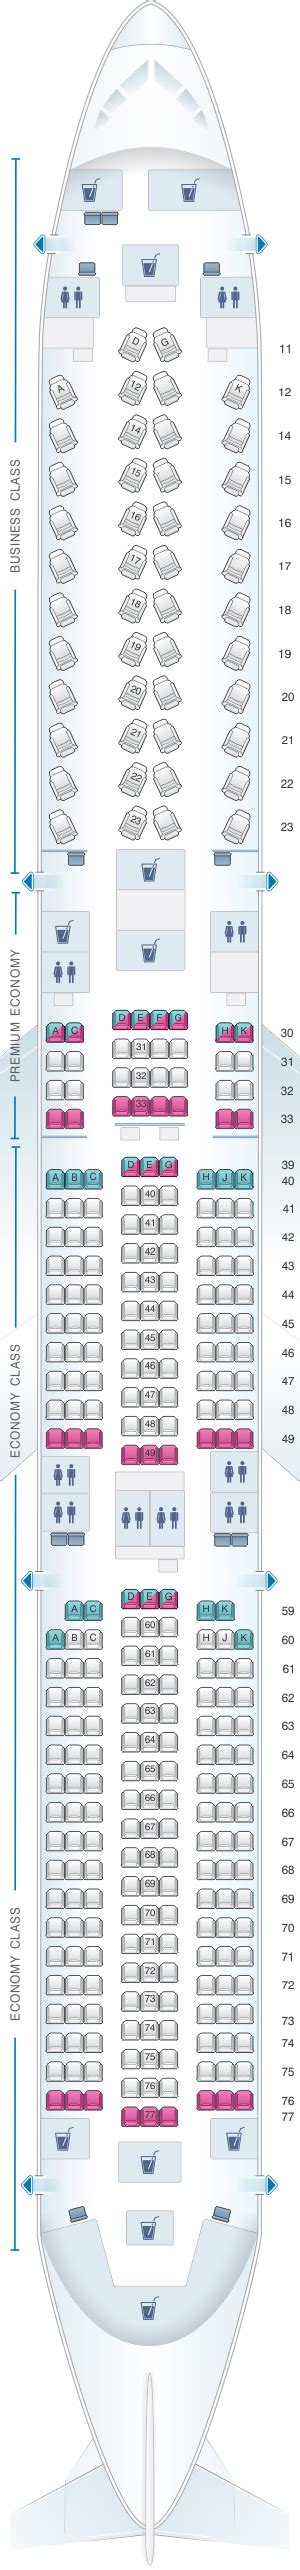 Cathay Pacific A359 Seating Chart Elcho Table